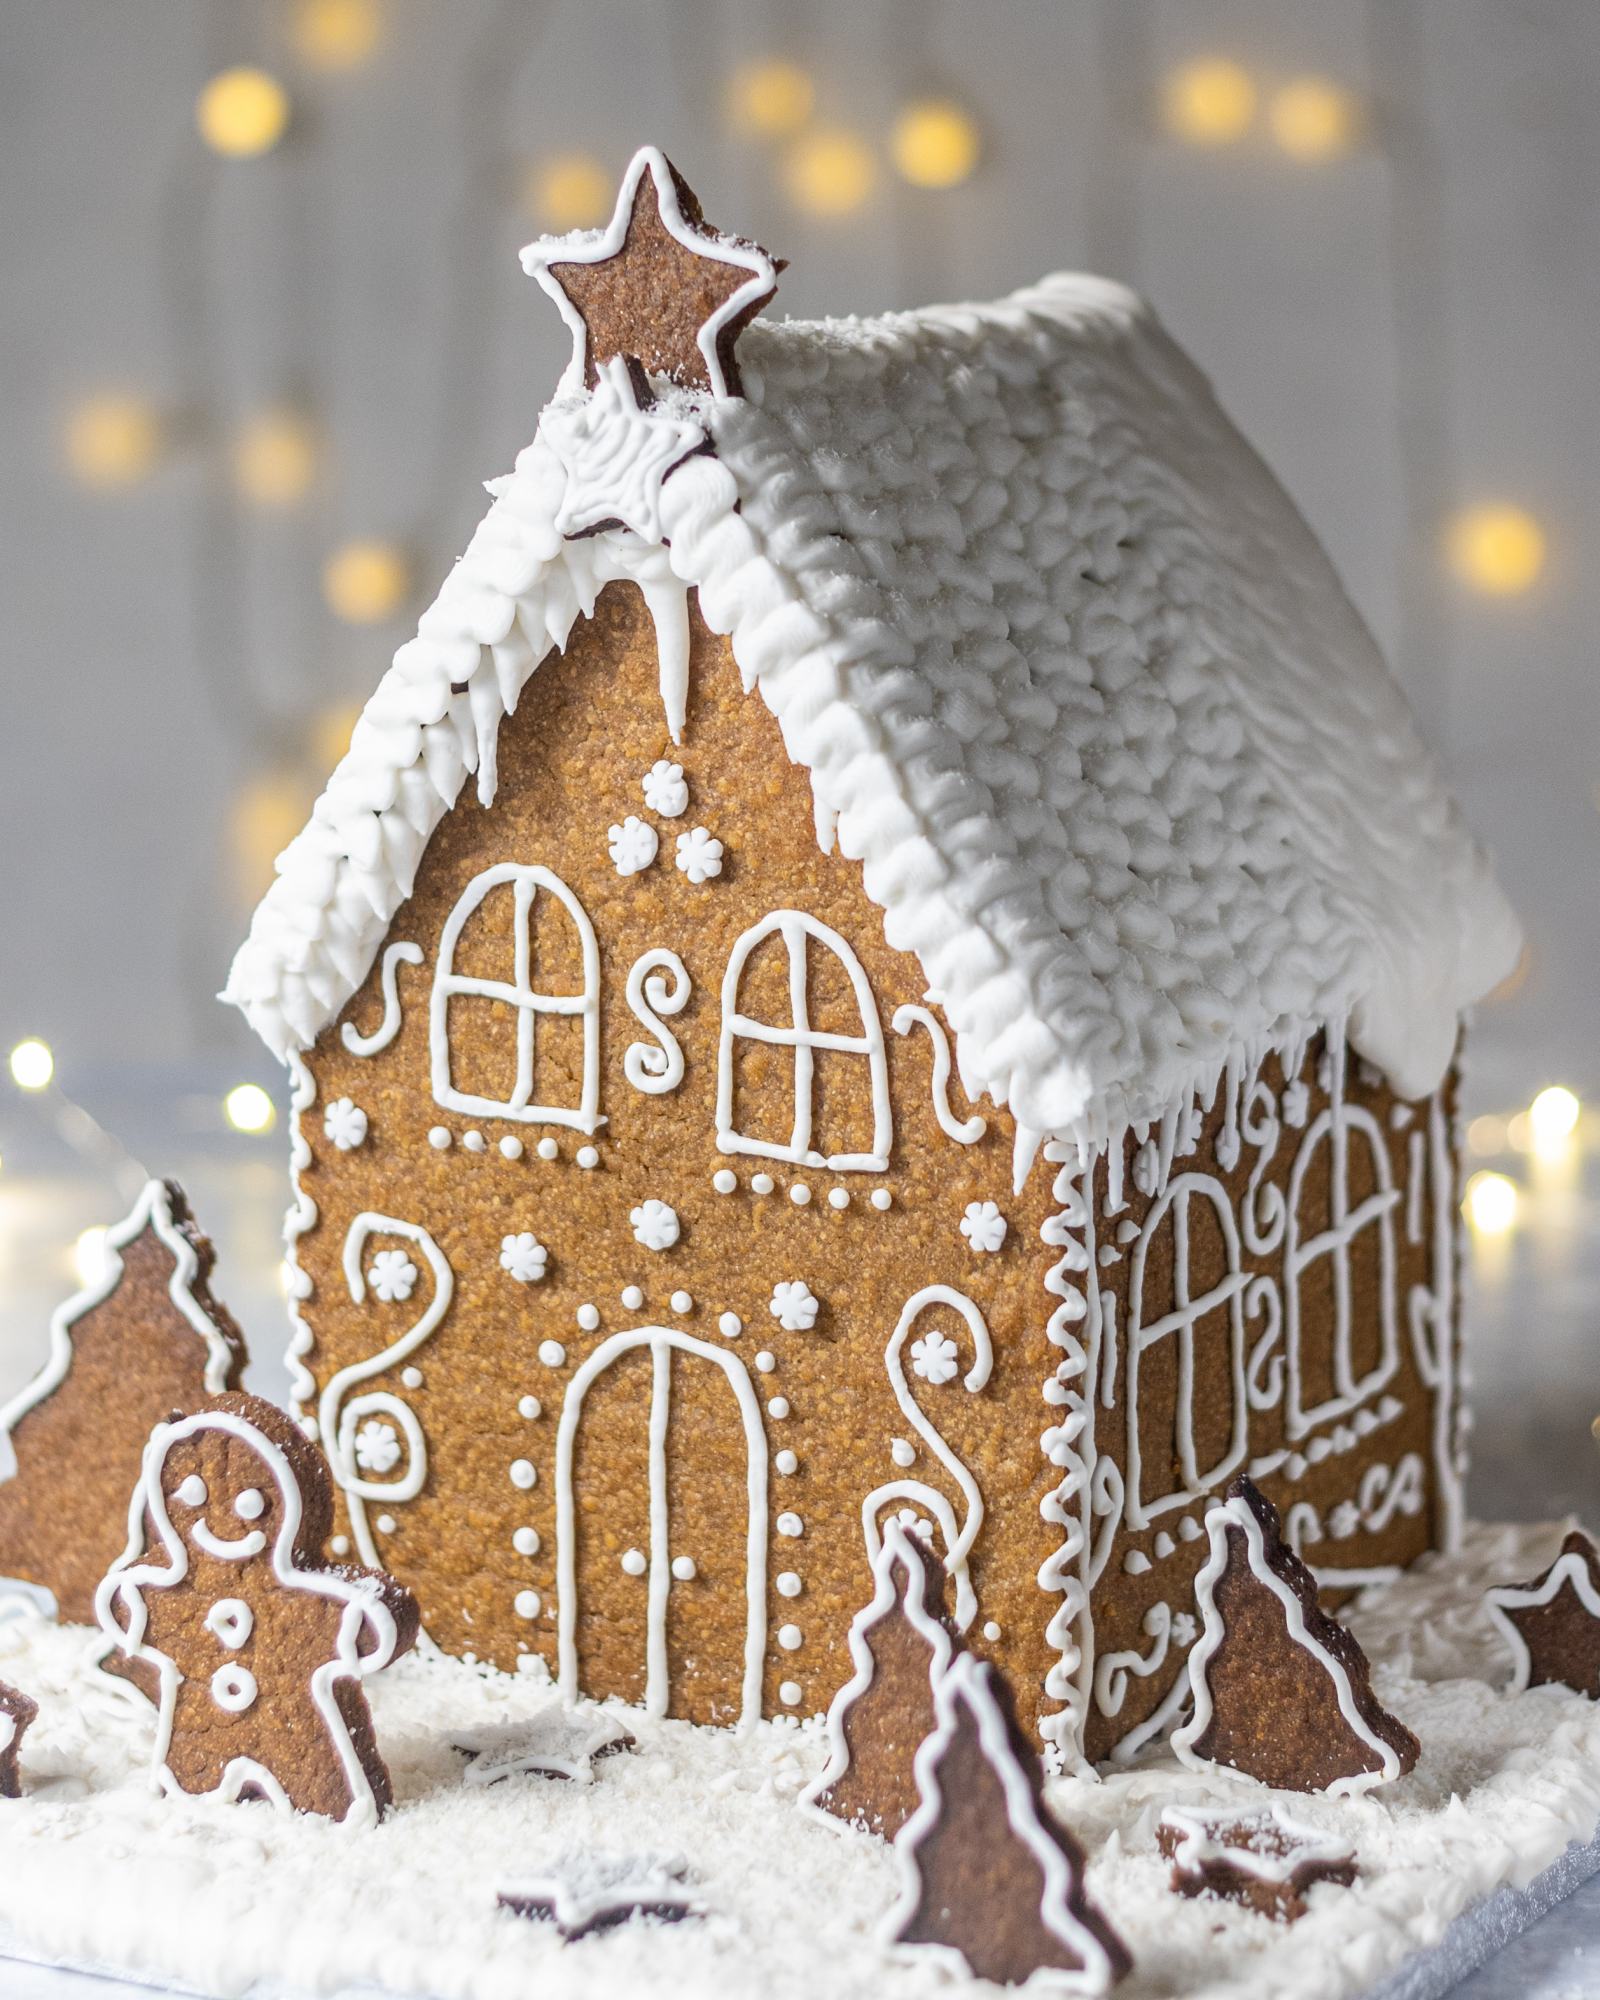 Vegan Gingerbread House, decorated with white buttercream and 'Ho Ho' written on the back, with white roof, photographed on a light backdrop with fairy lights